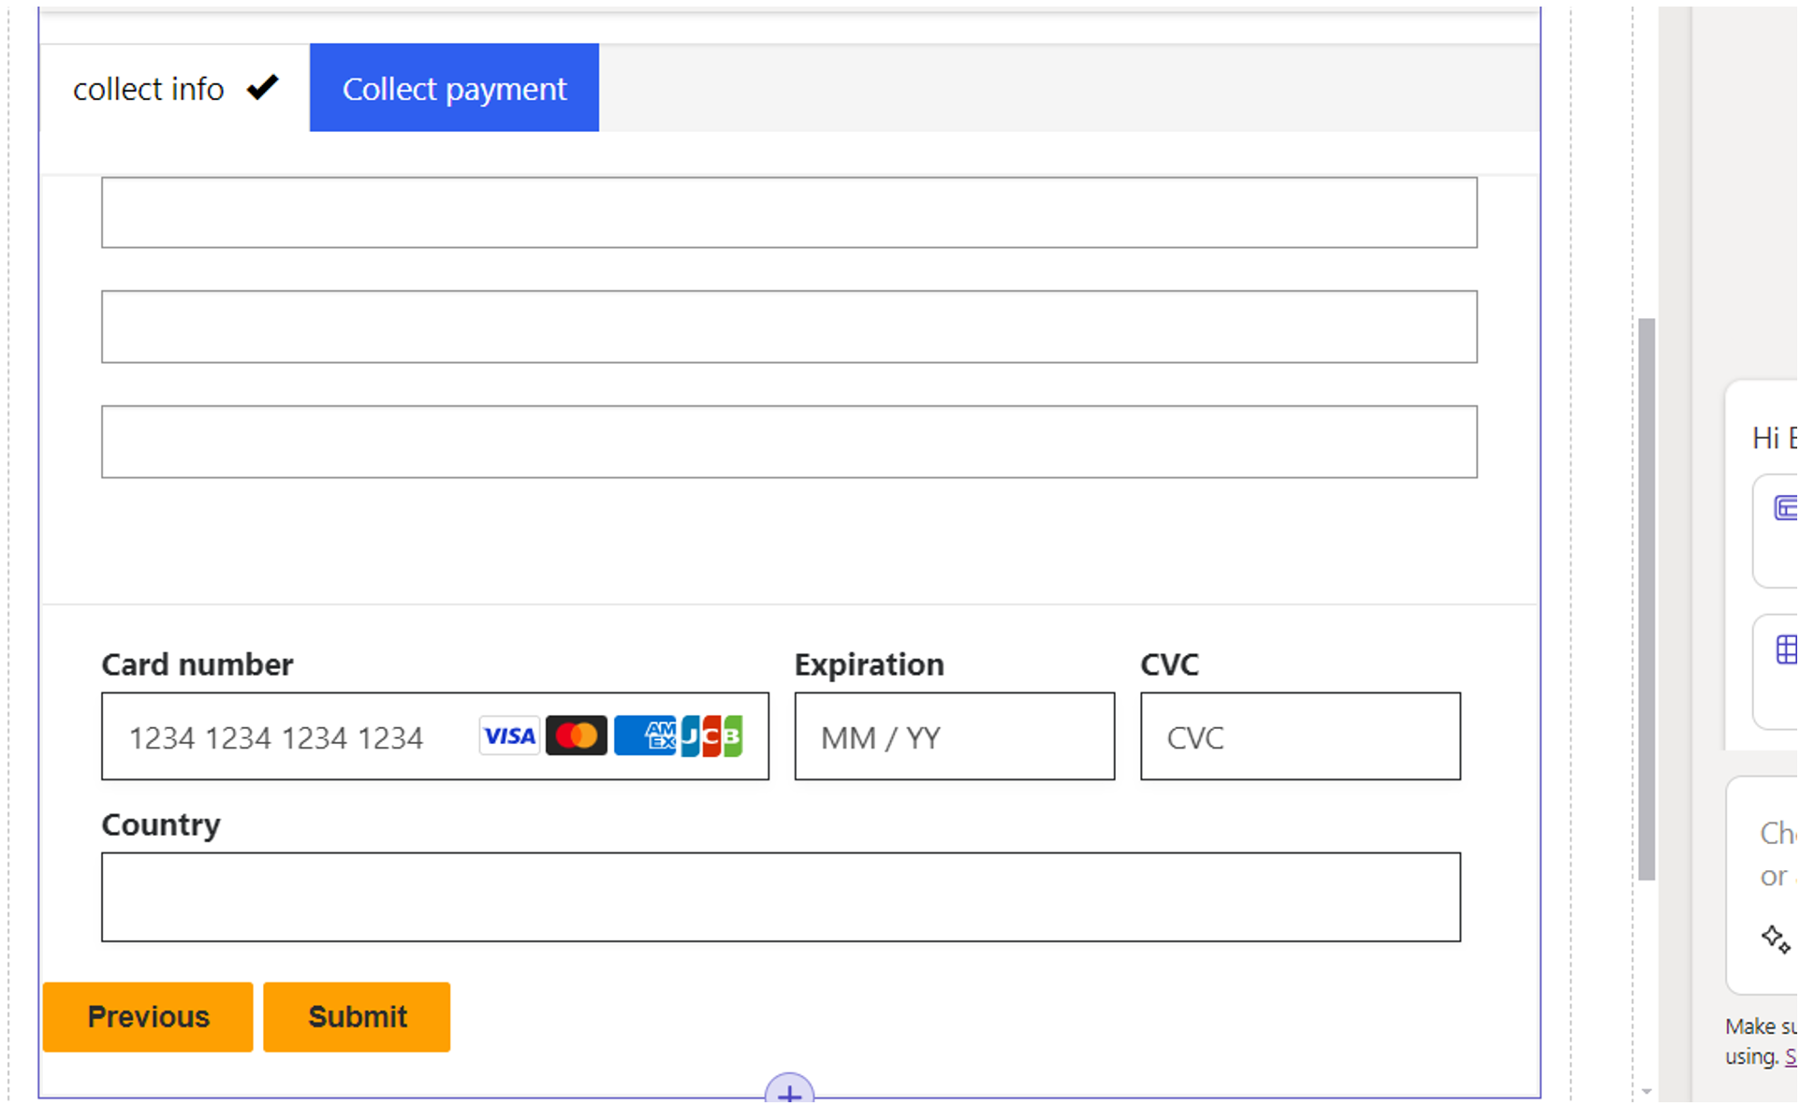 An image showing the collect payment page at Power Pages.